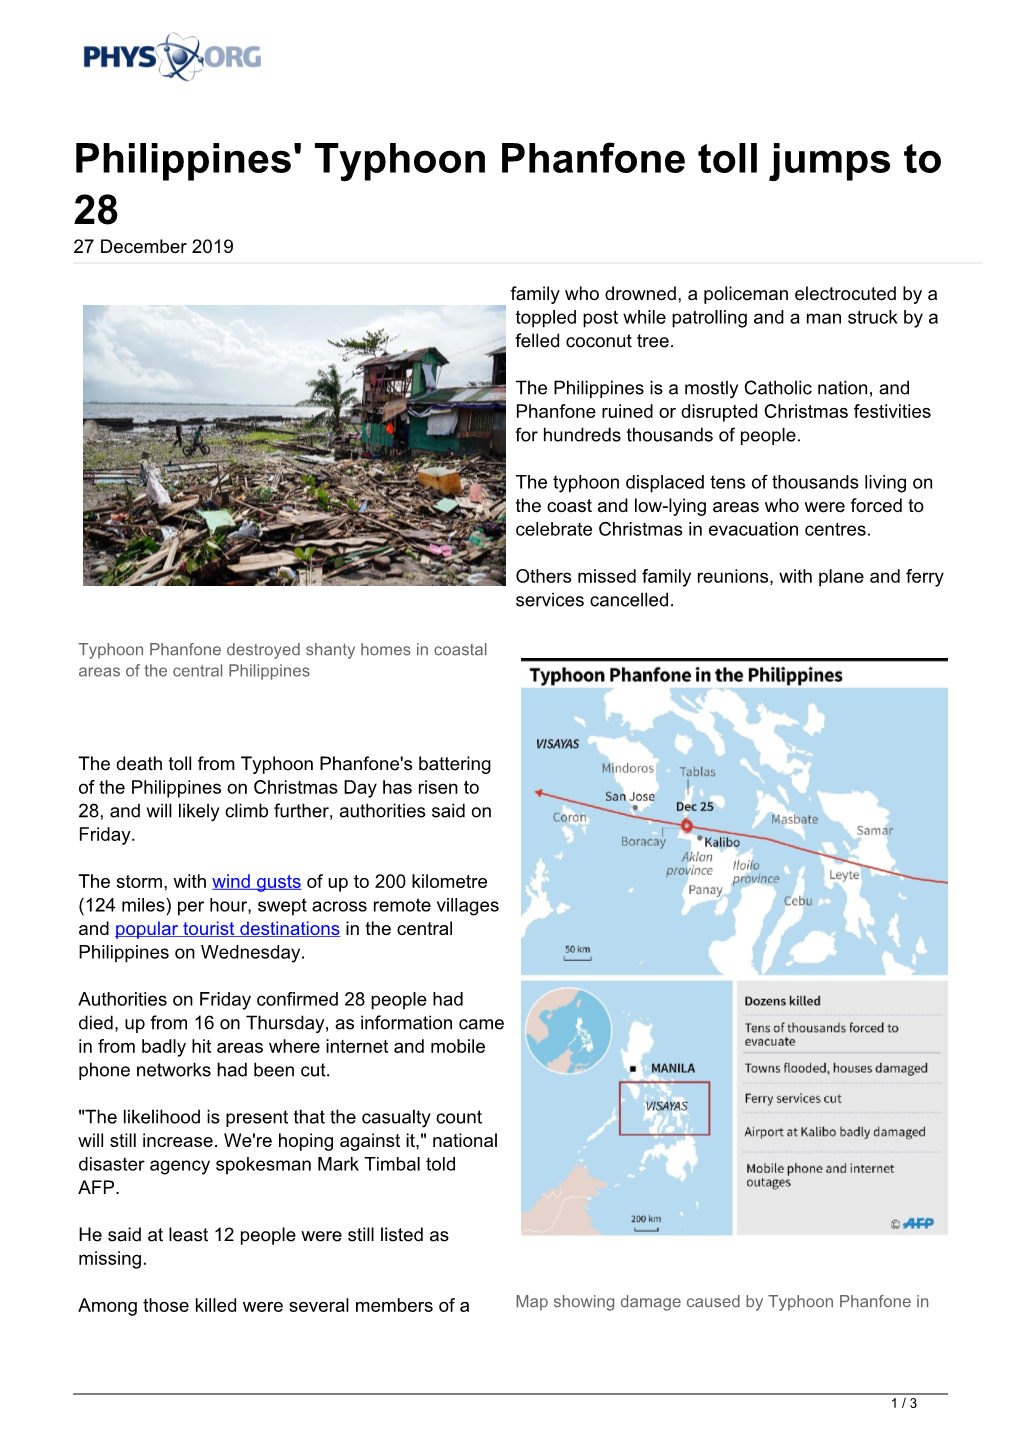 Philippines' Typhoon Phanfone Toll Jumps to 28 27 December 2019